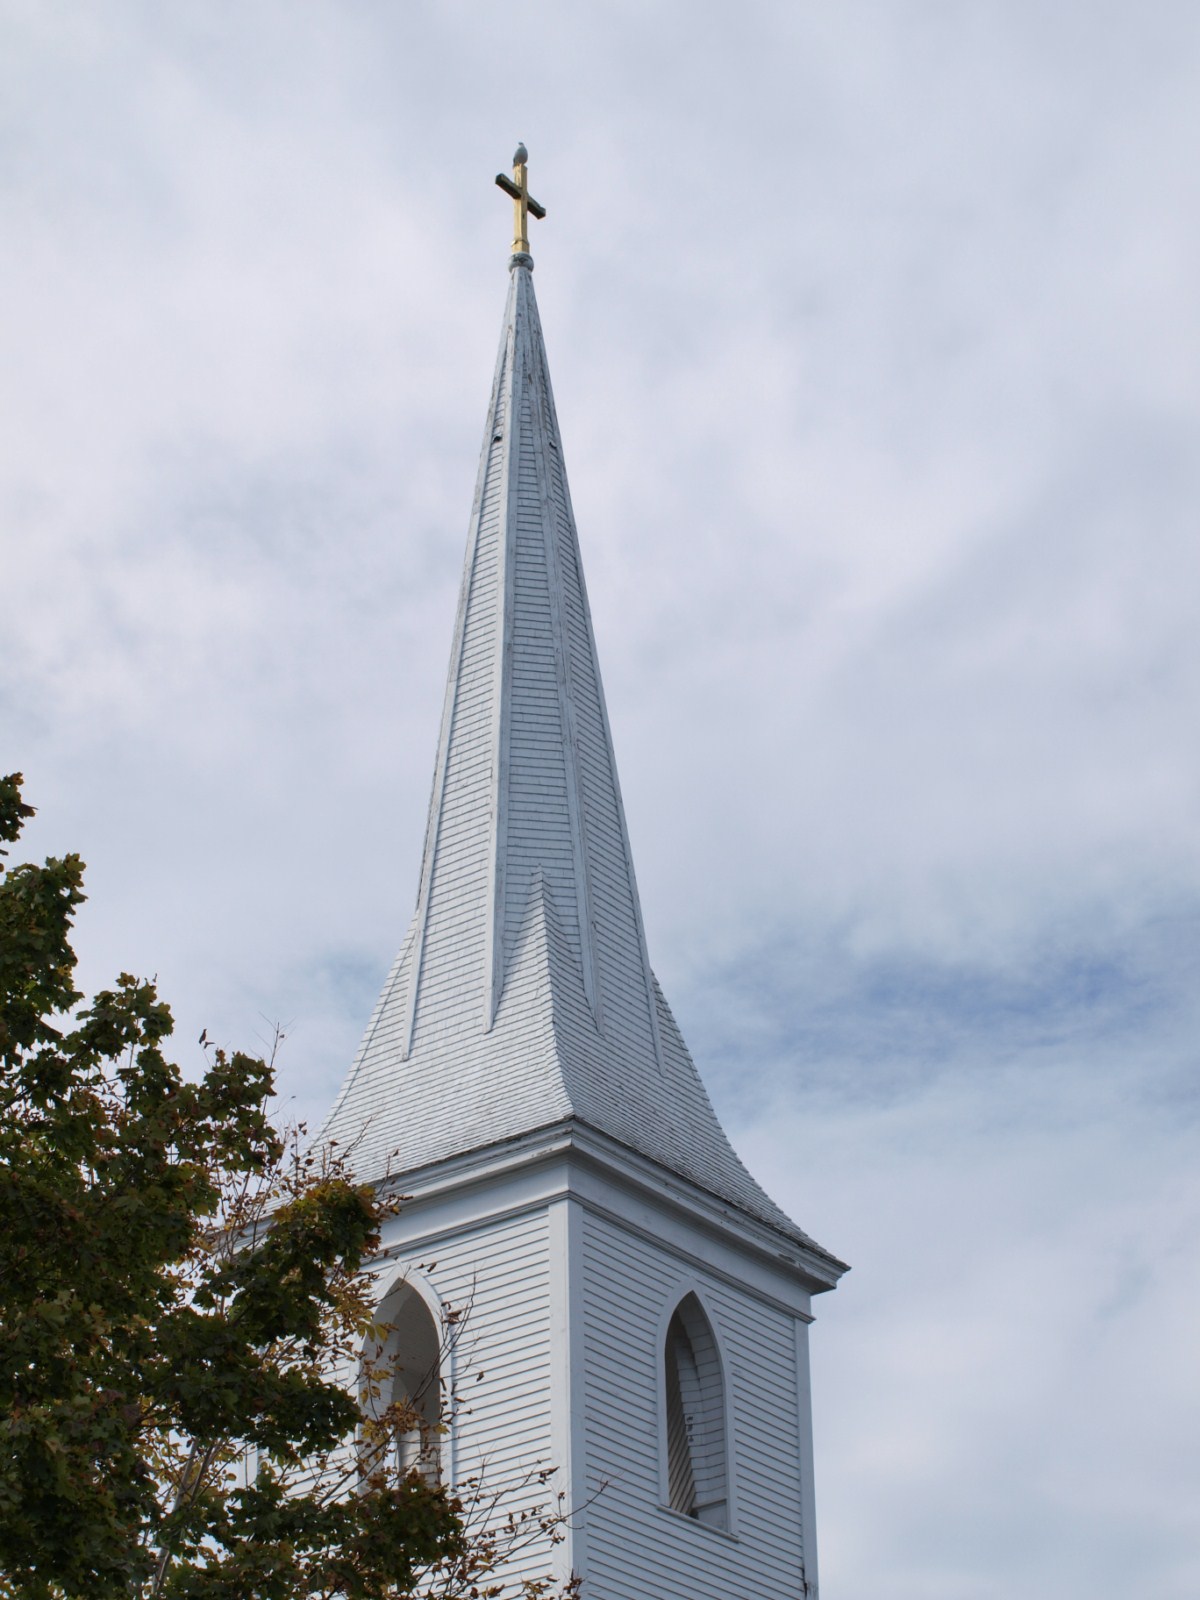 there is a church steeple with a cross on top